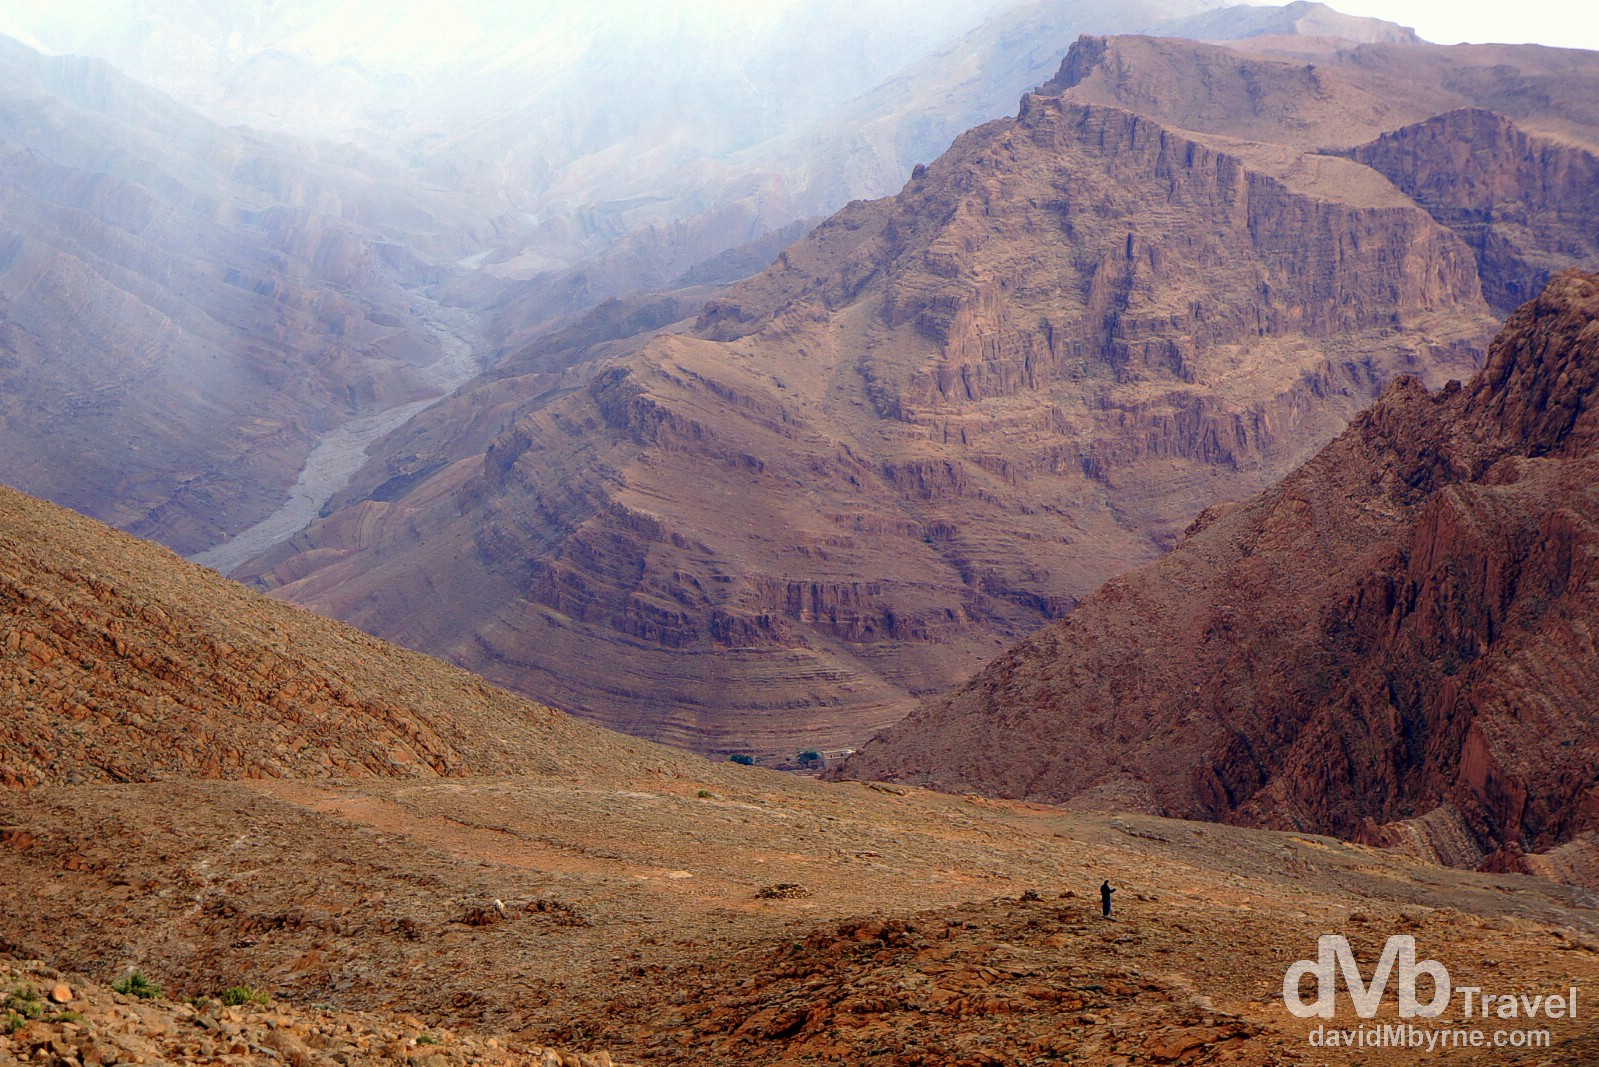 In the barren hills above Todra Gorge, Morocco. May 16th, 2014. 